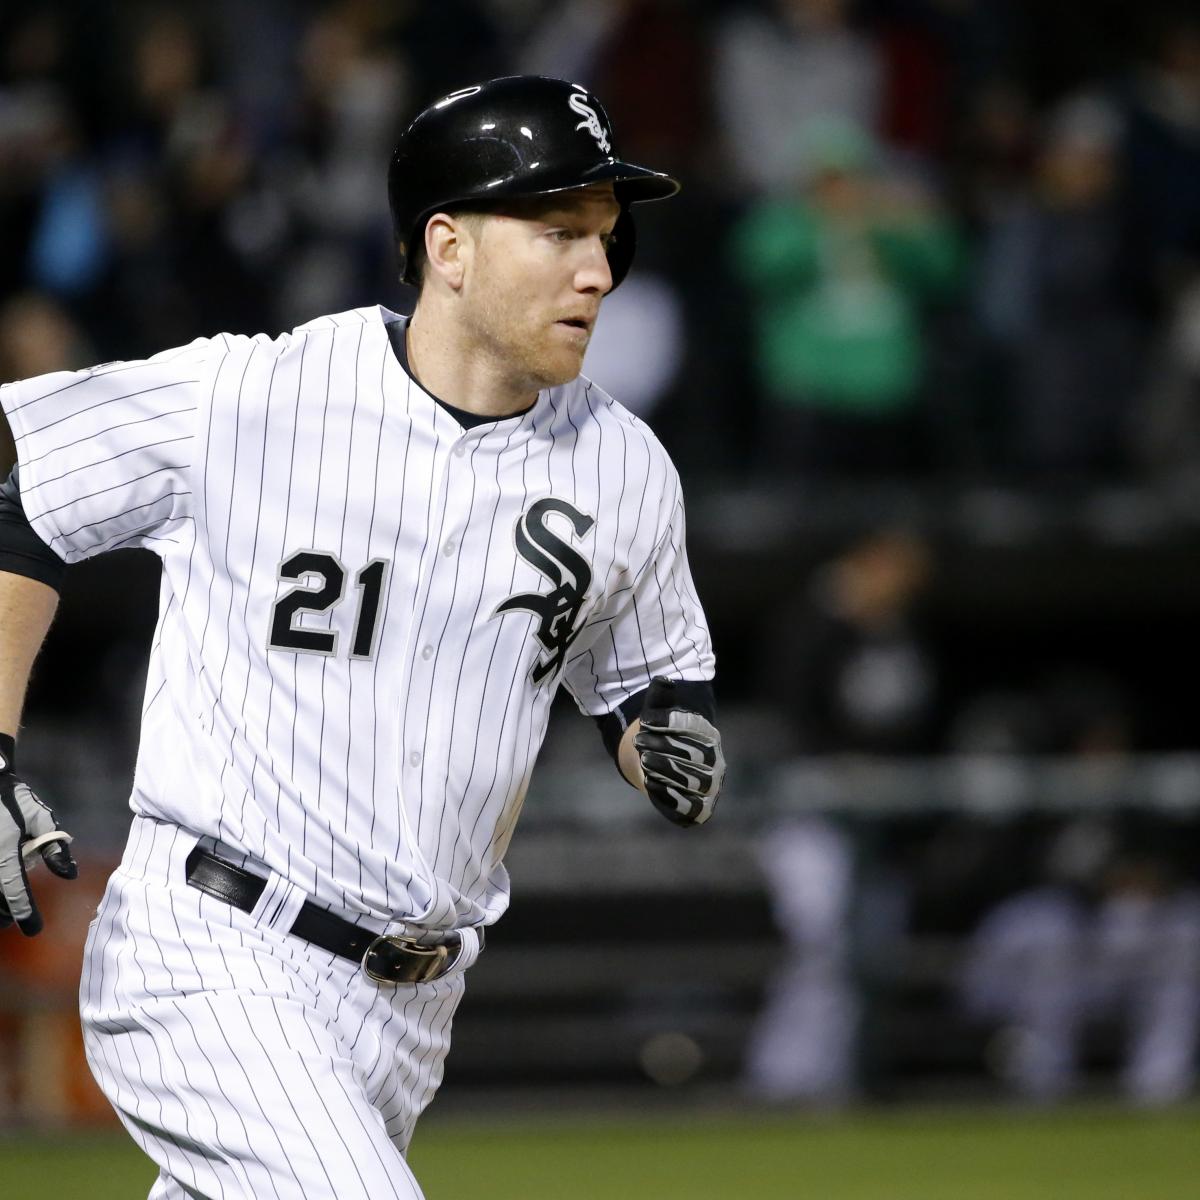 Chicago White Sox: Todd Frazier hits for power, not average